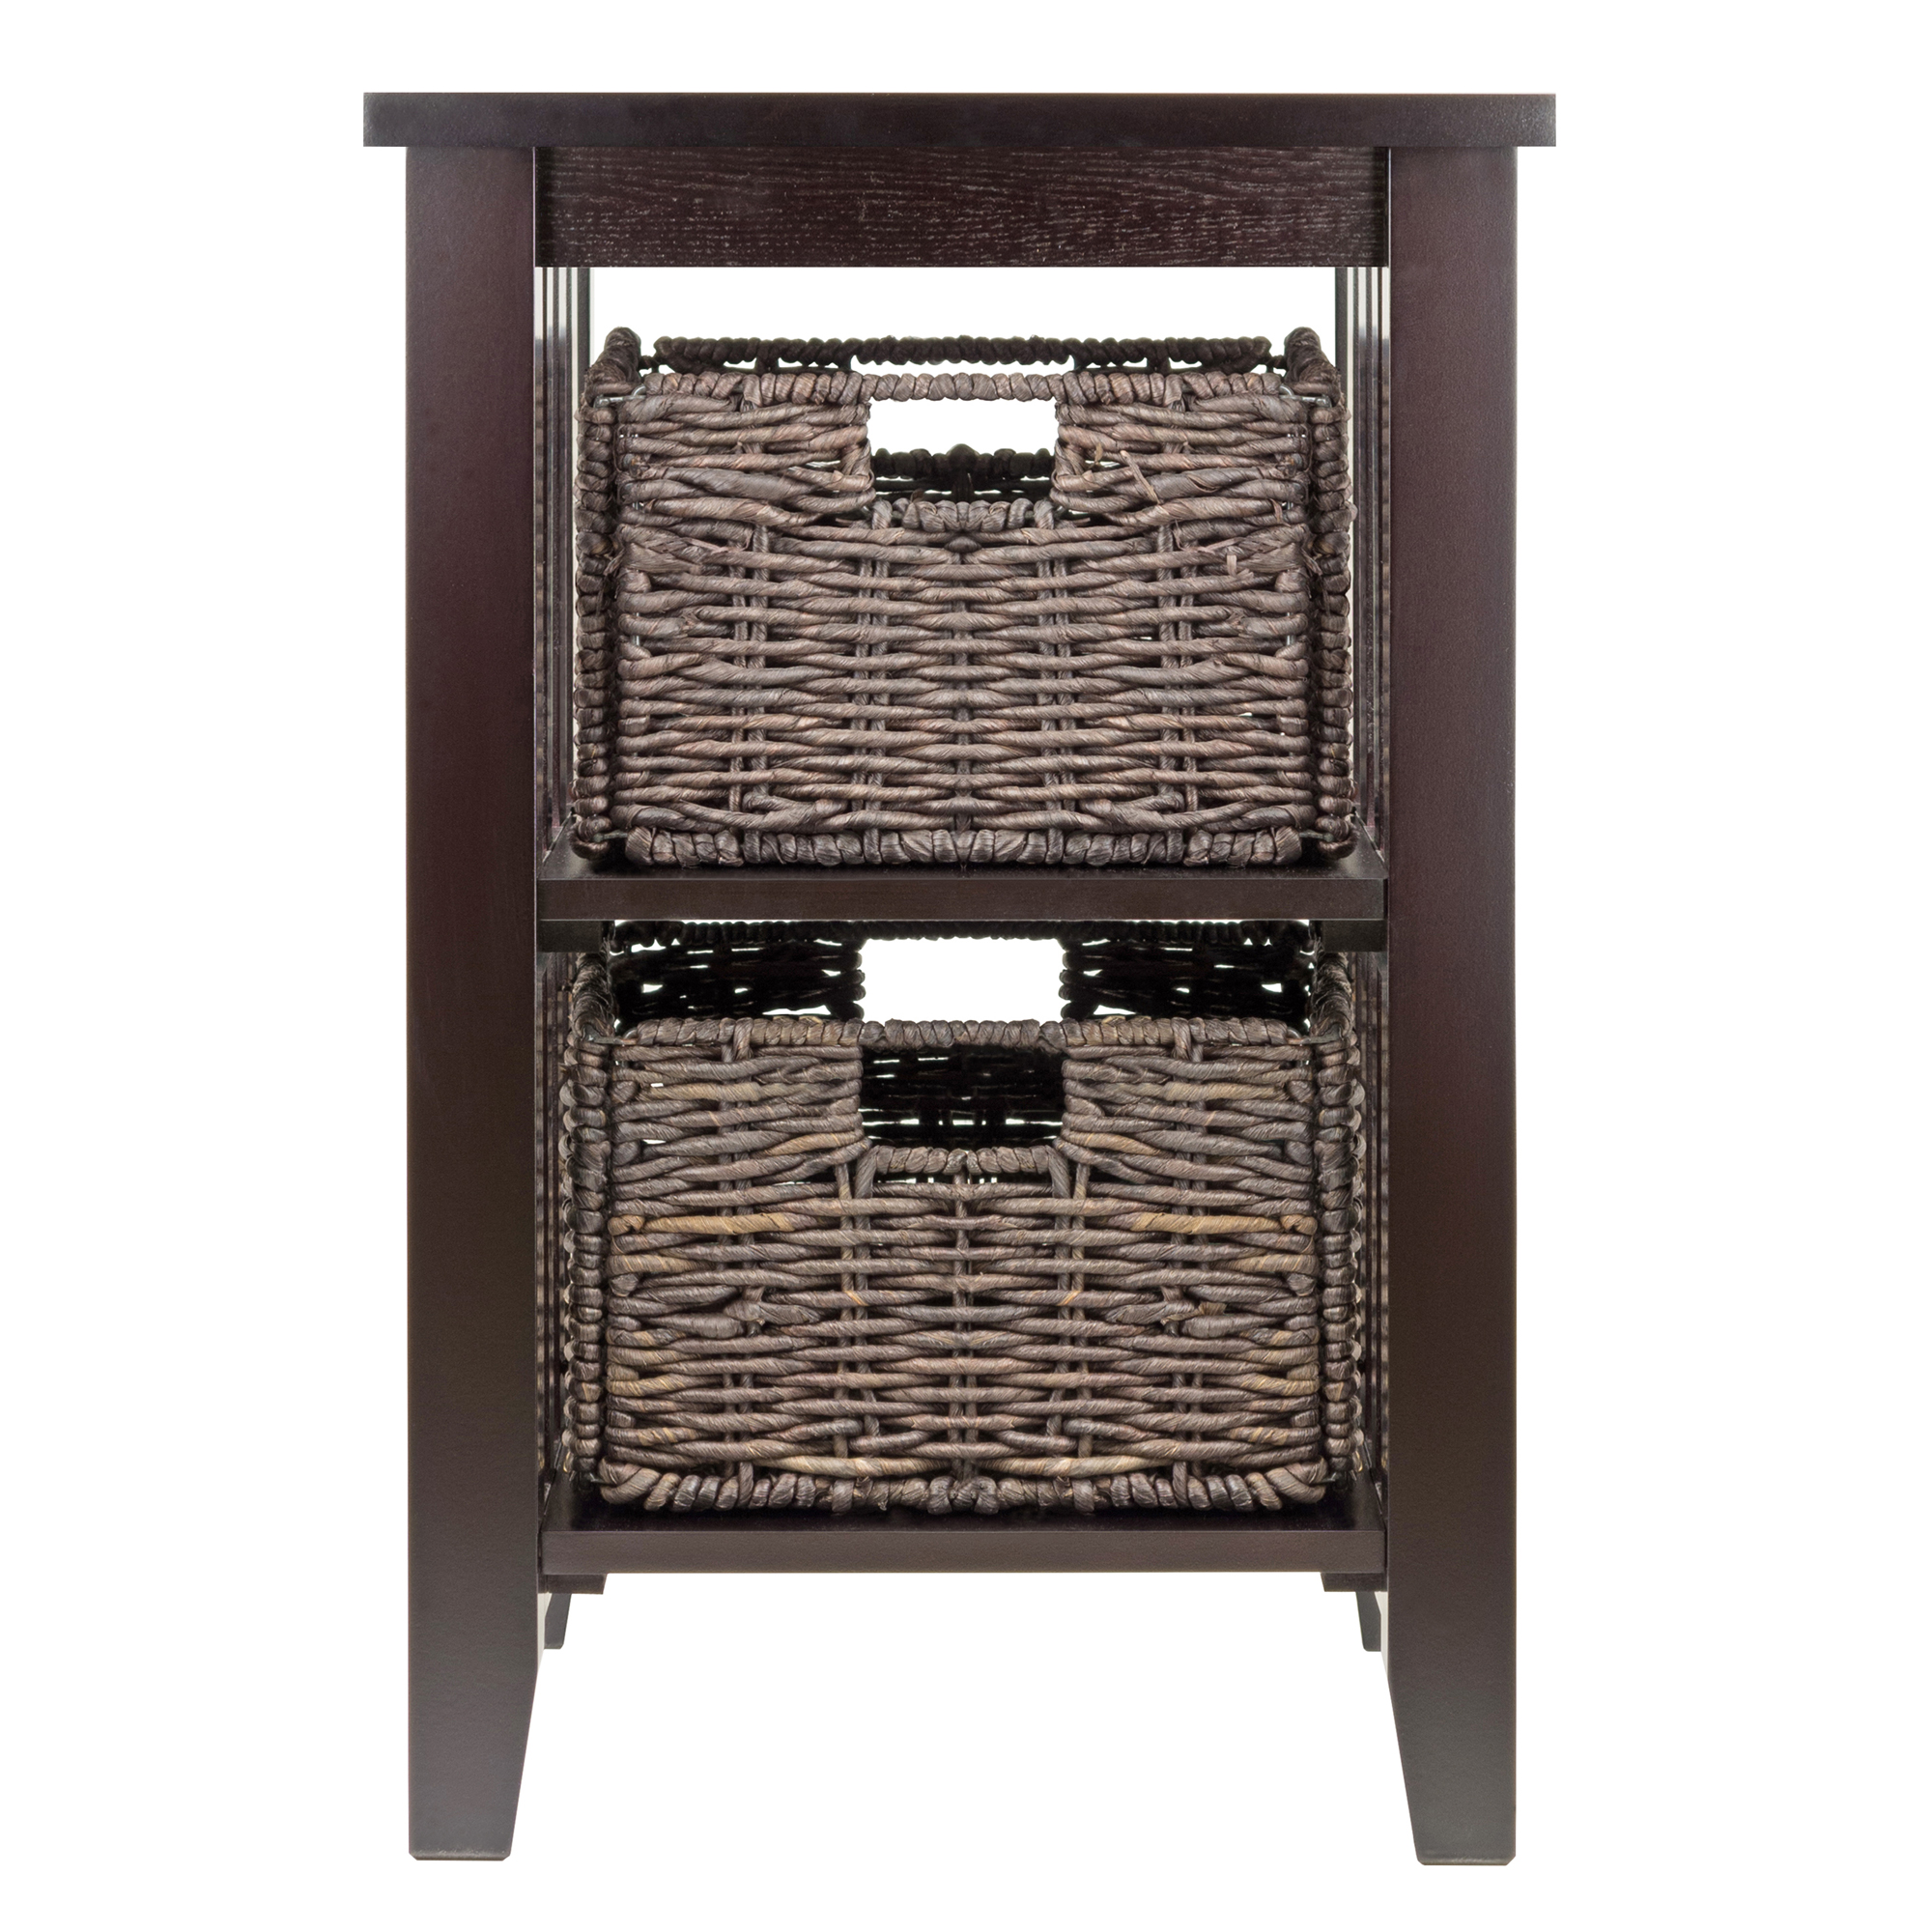 Winsome Wood Morris Accent Table, 2 Foldable Chocolate Corn Husk Baskets, Espresso Finish - image 5 of 5